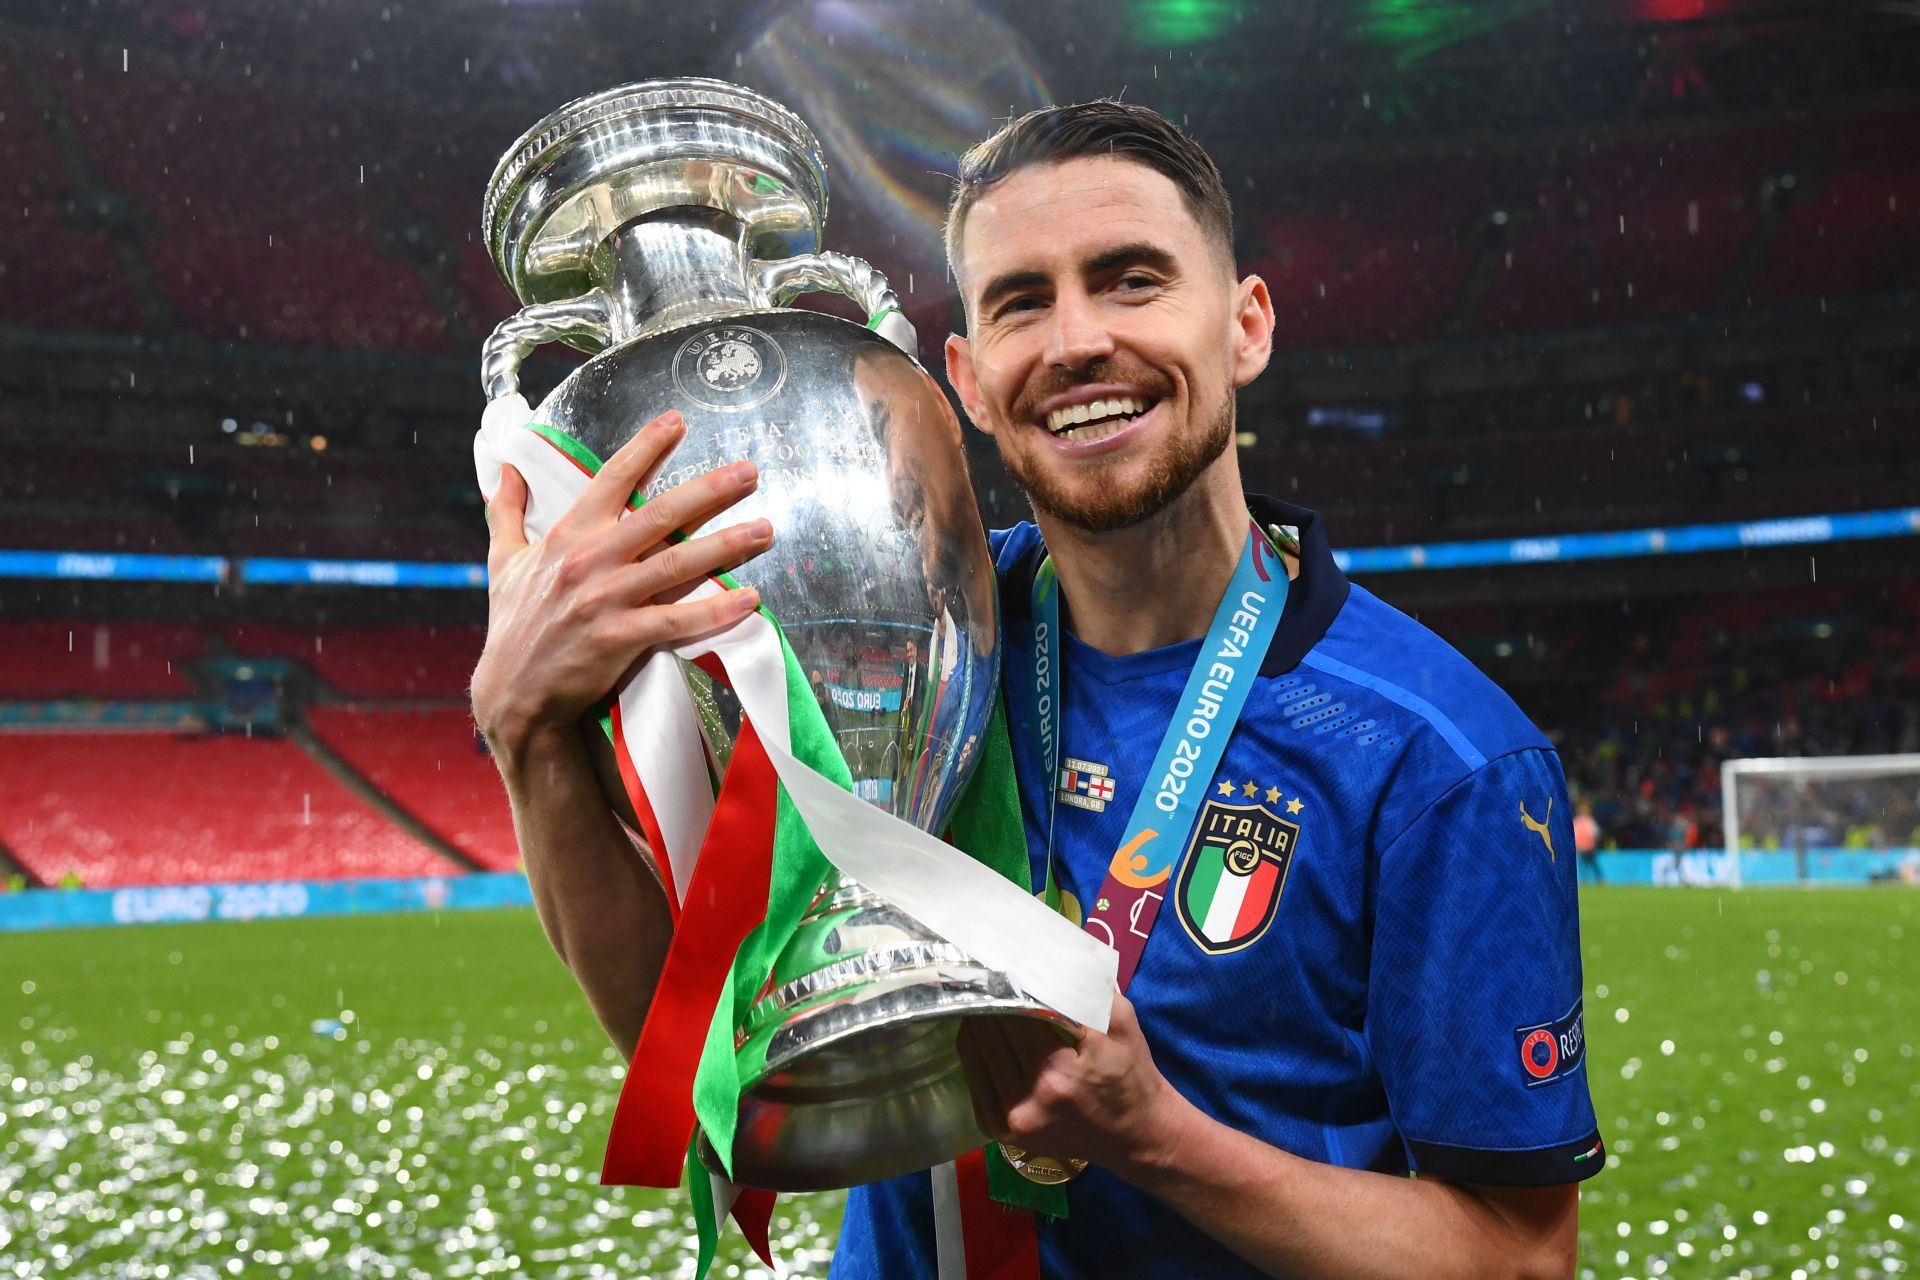 Jorginho poses after winning the Euro 2020 with Italy.